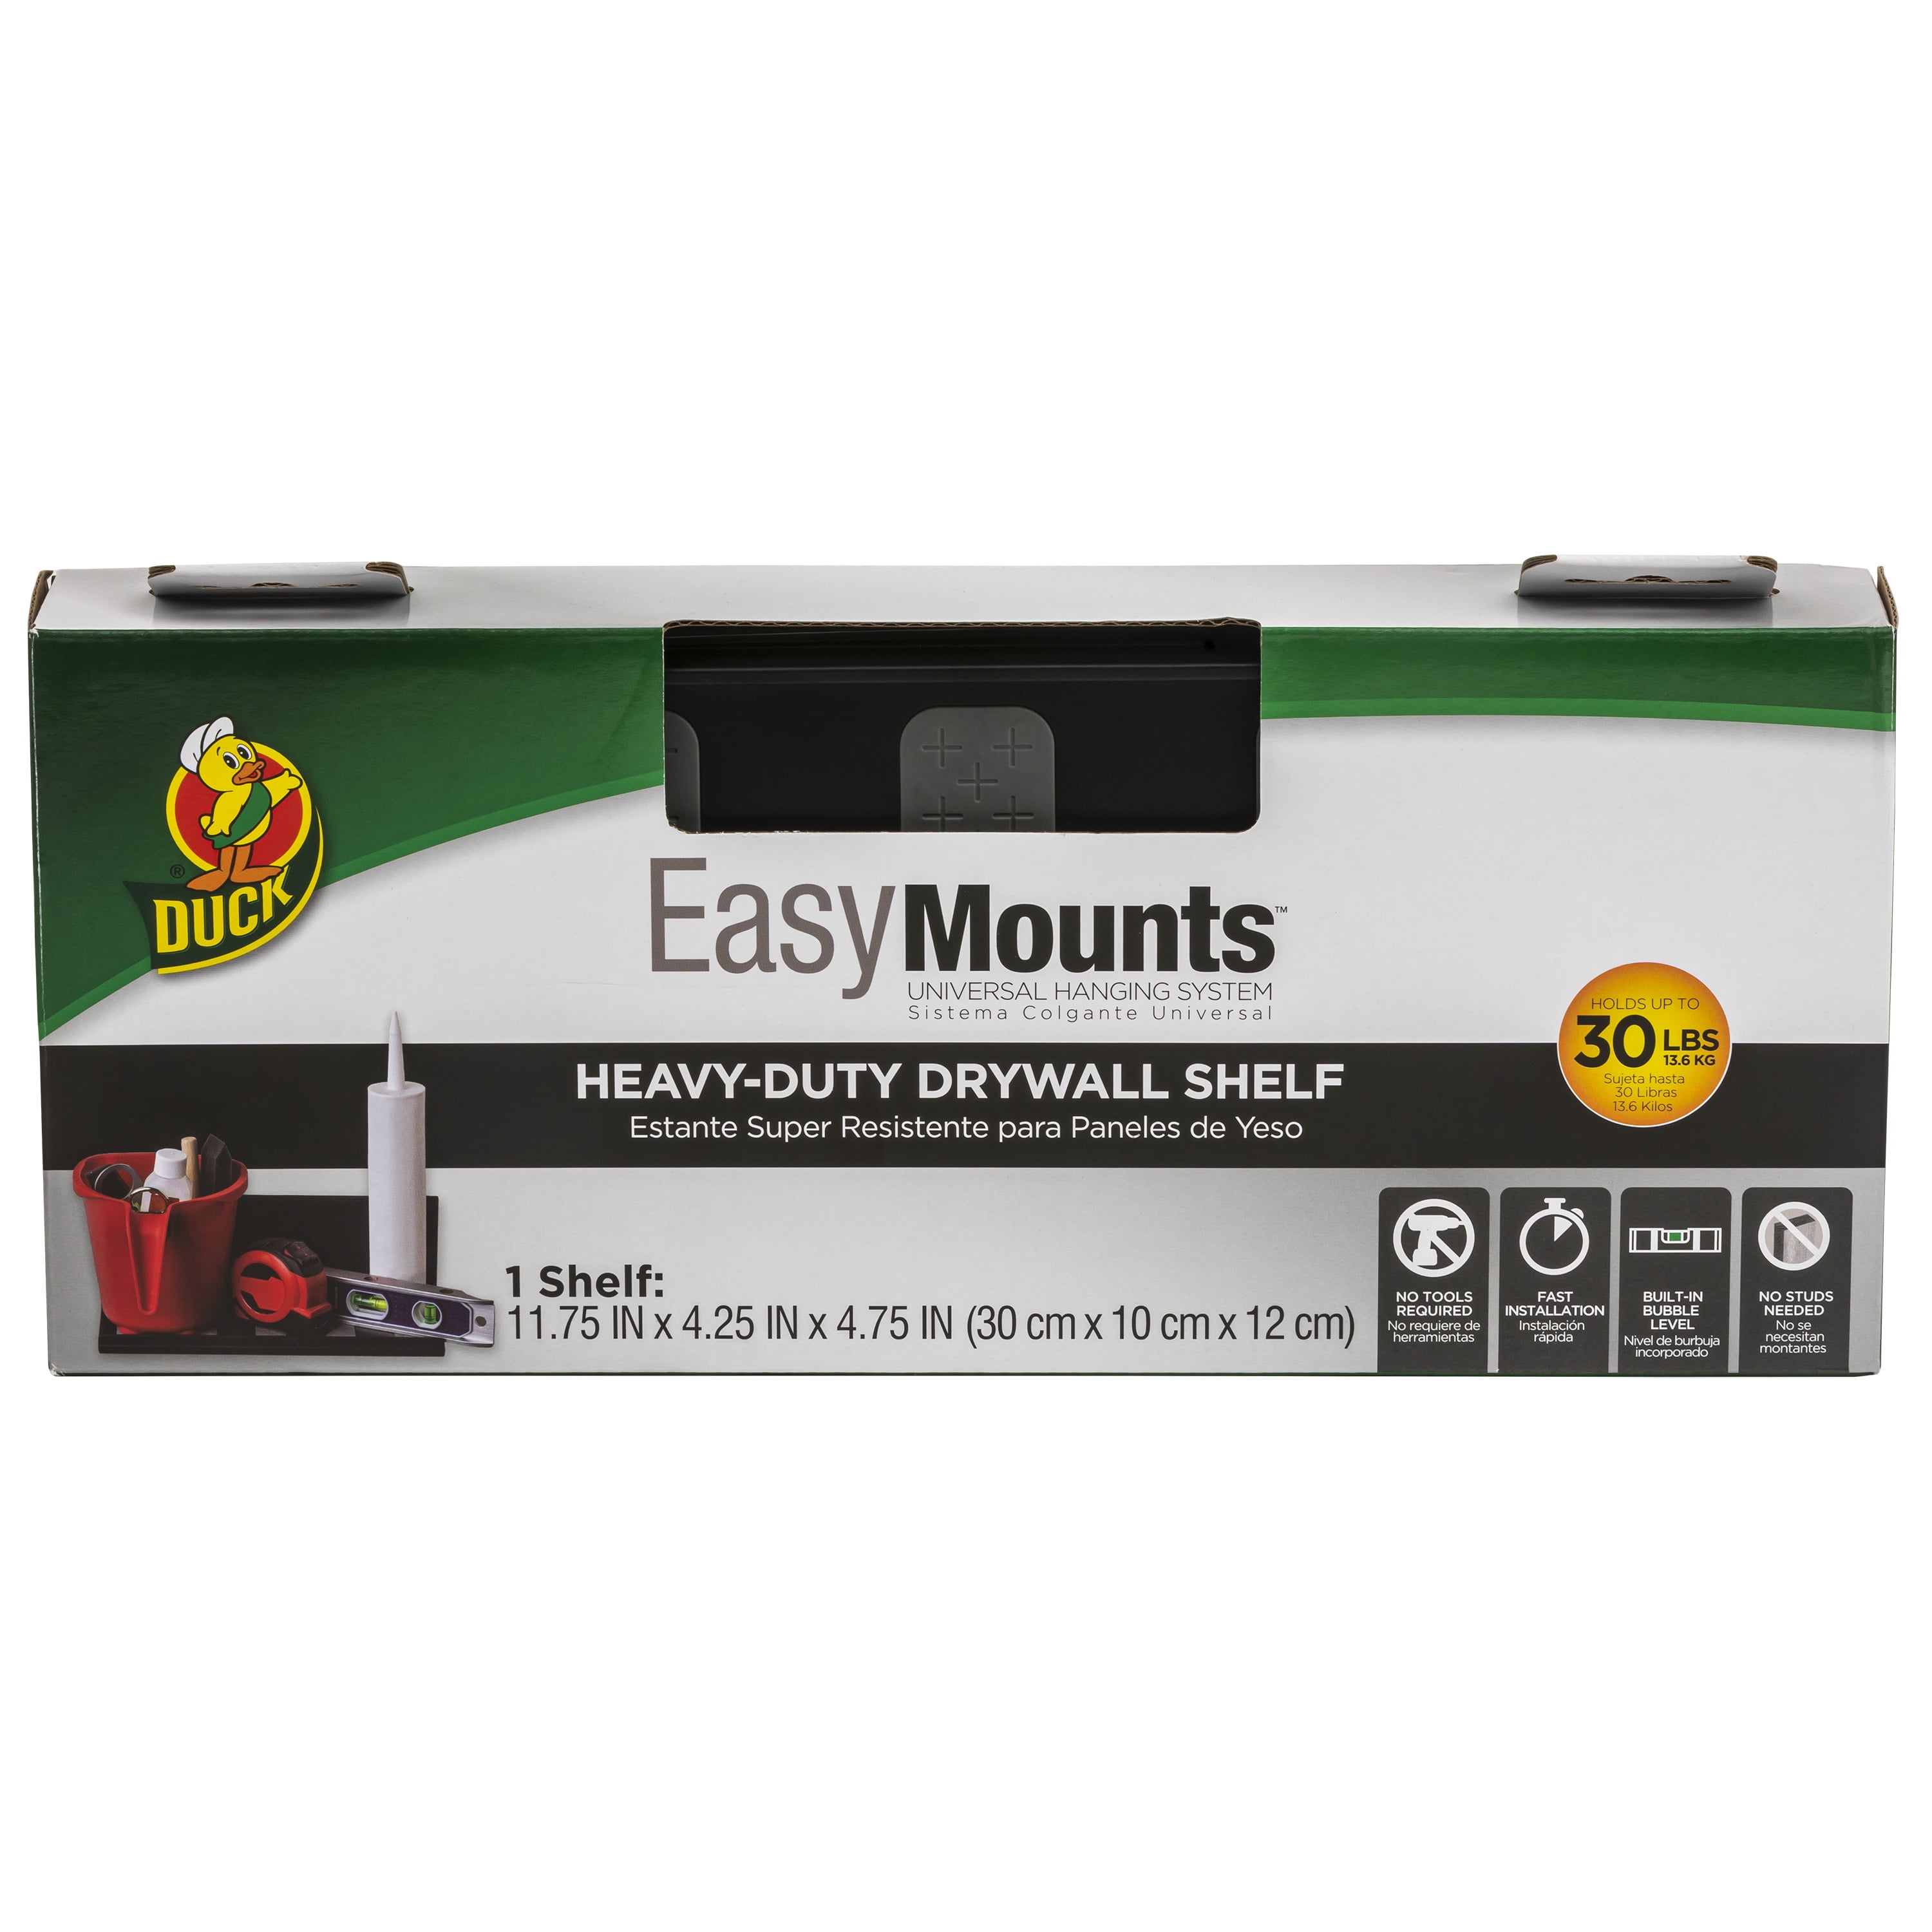 Duck EasyMounts Black Floating Garage Shelf - No Tools Required, Holds up to 30 lbs $11.61 + Free S&H w/ Walmart+ or $35+